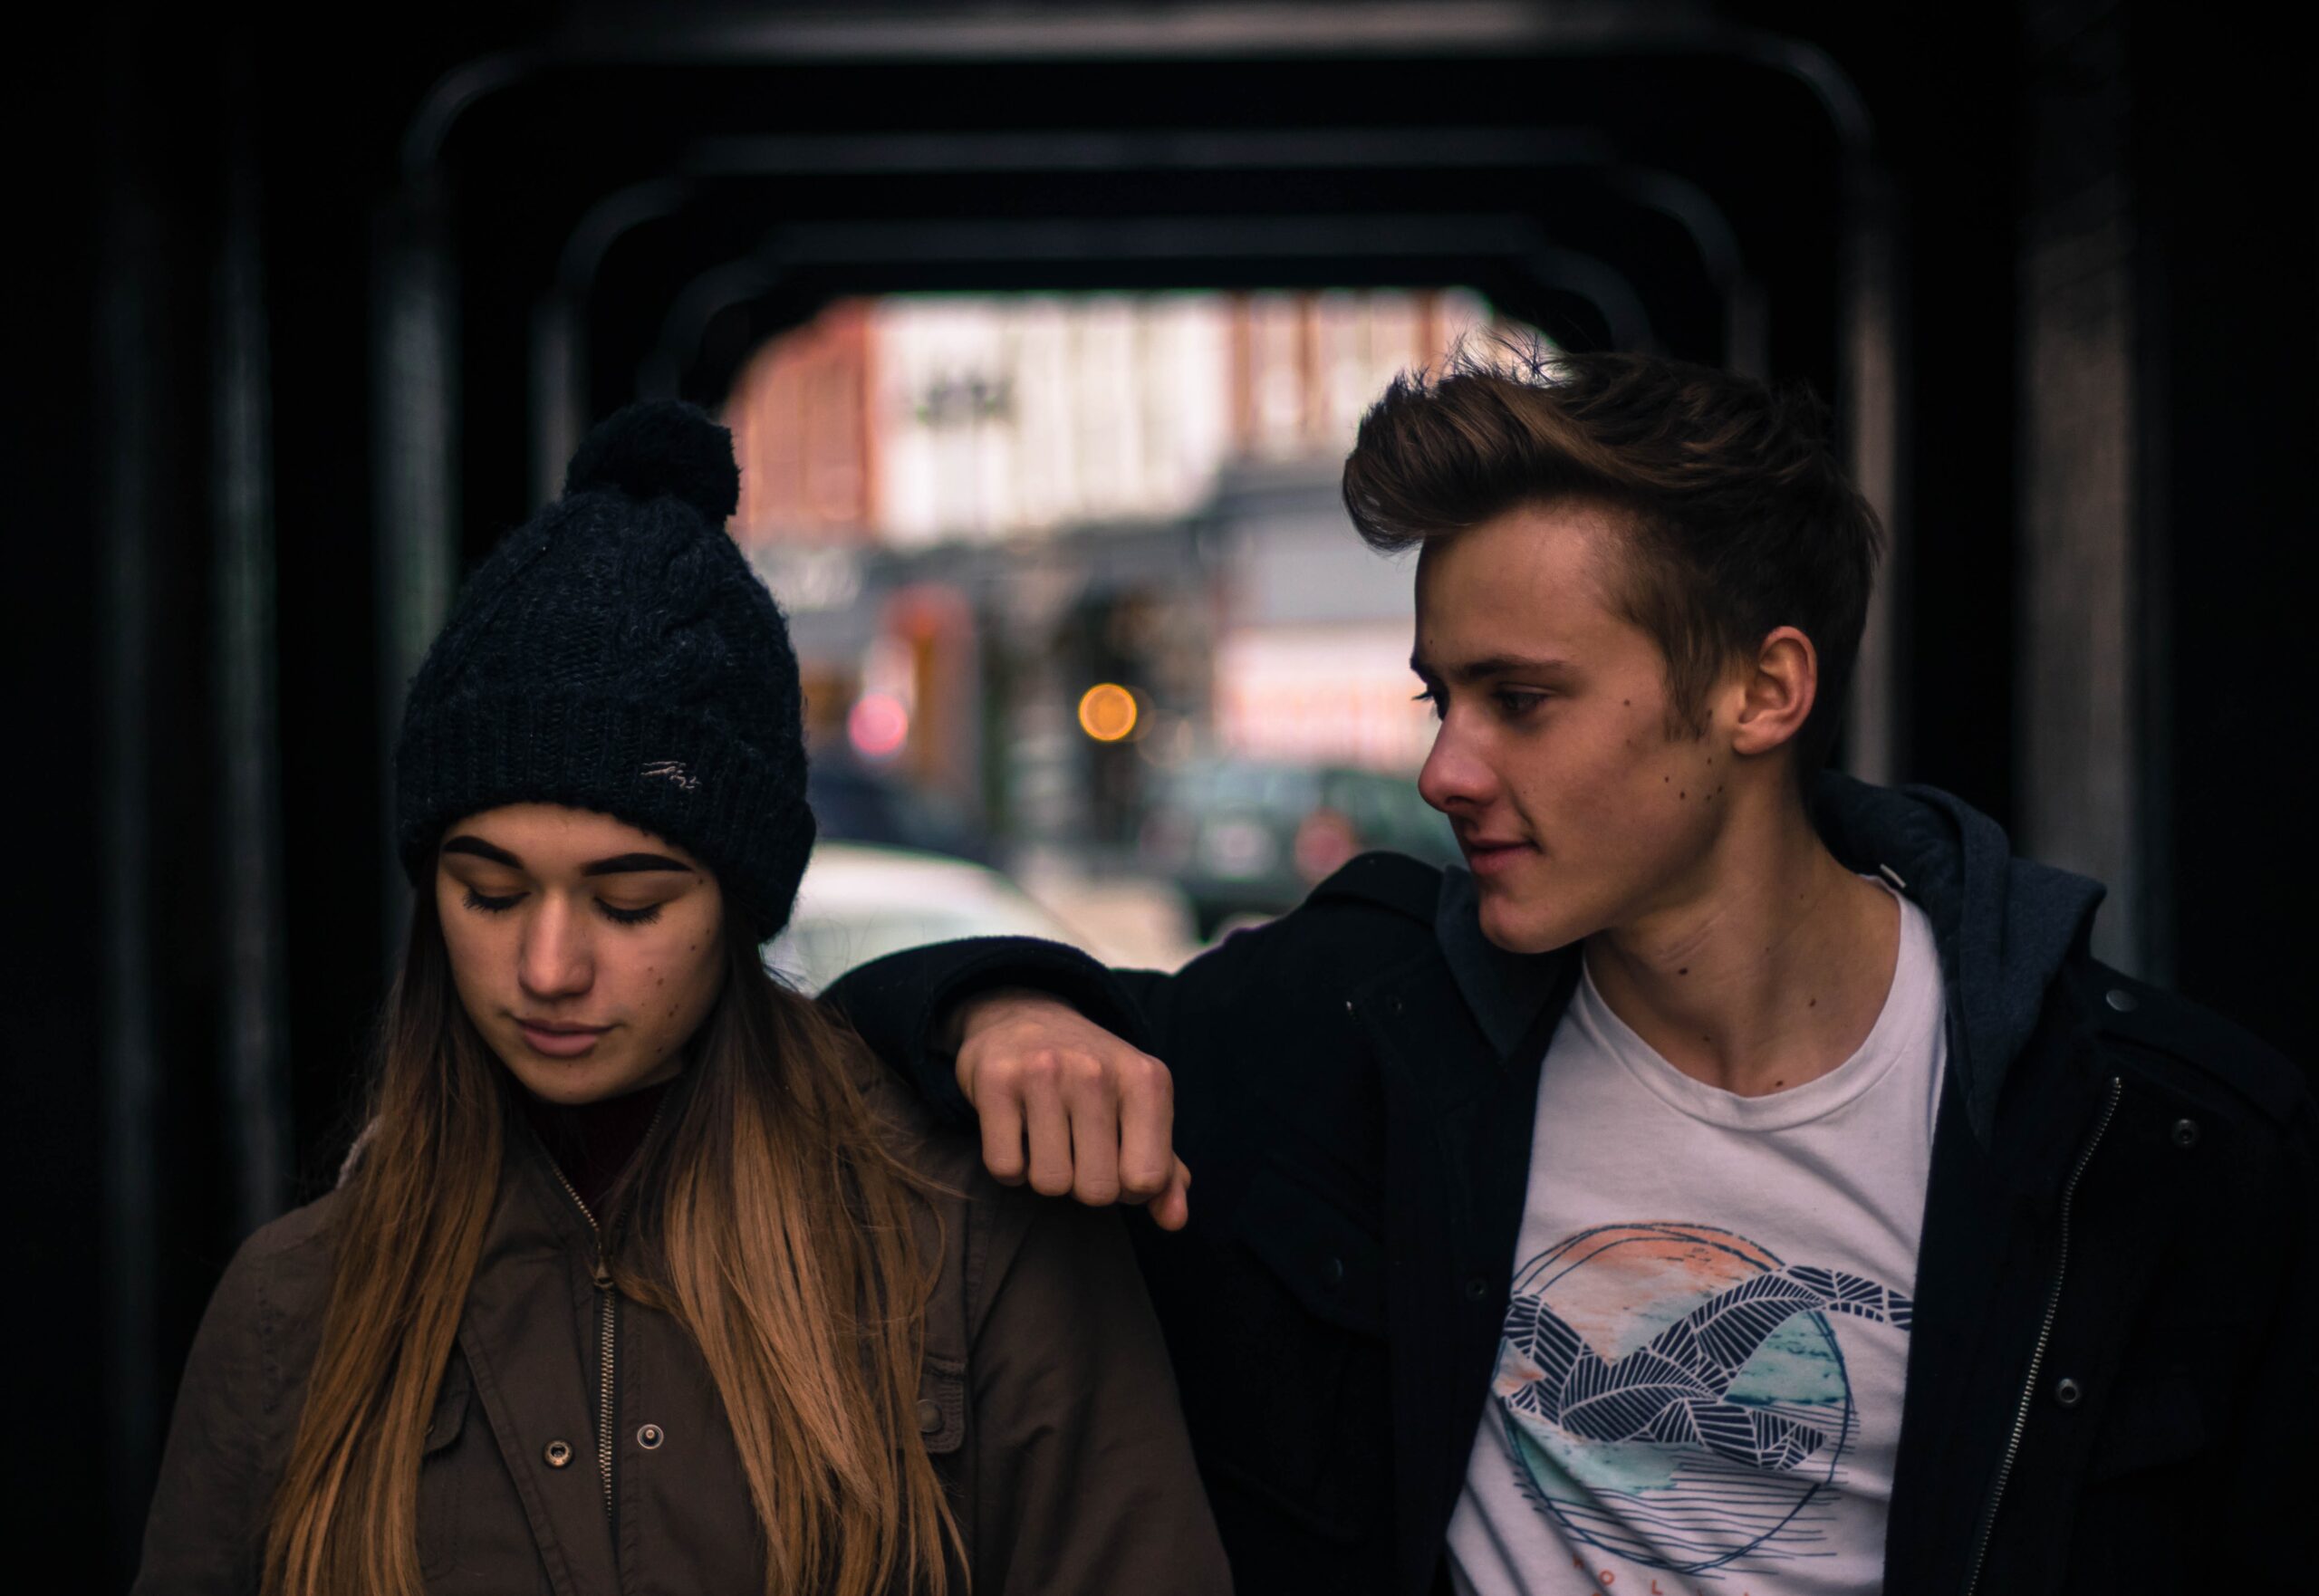 How To Leave A Toxic Relationship In A Healthy Way